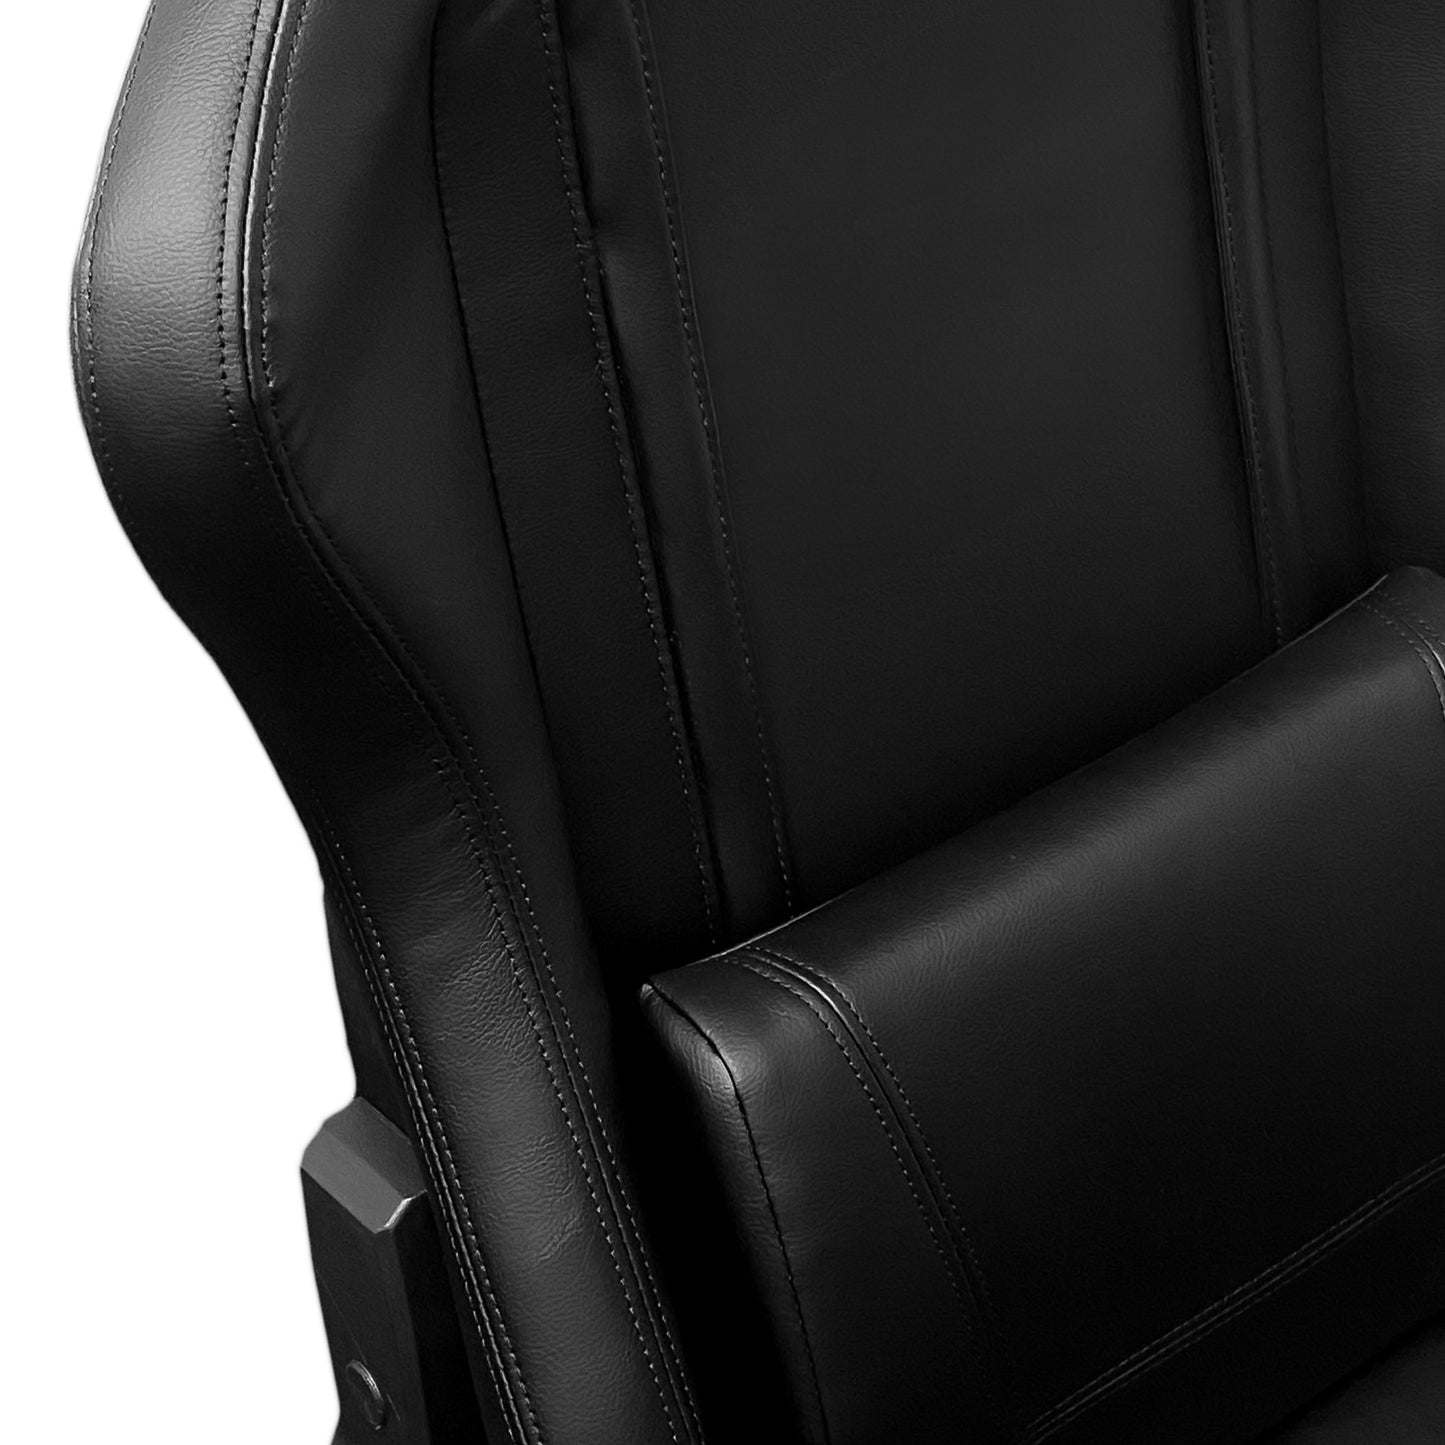 Xpression Pro Gaming Chair with North Dakota State Bison Logo